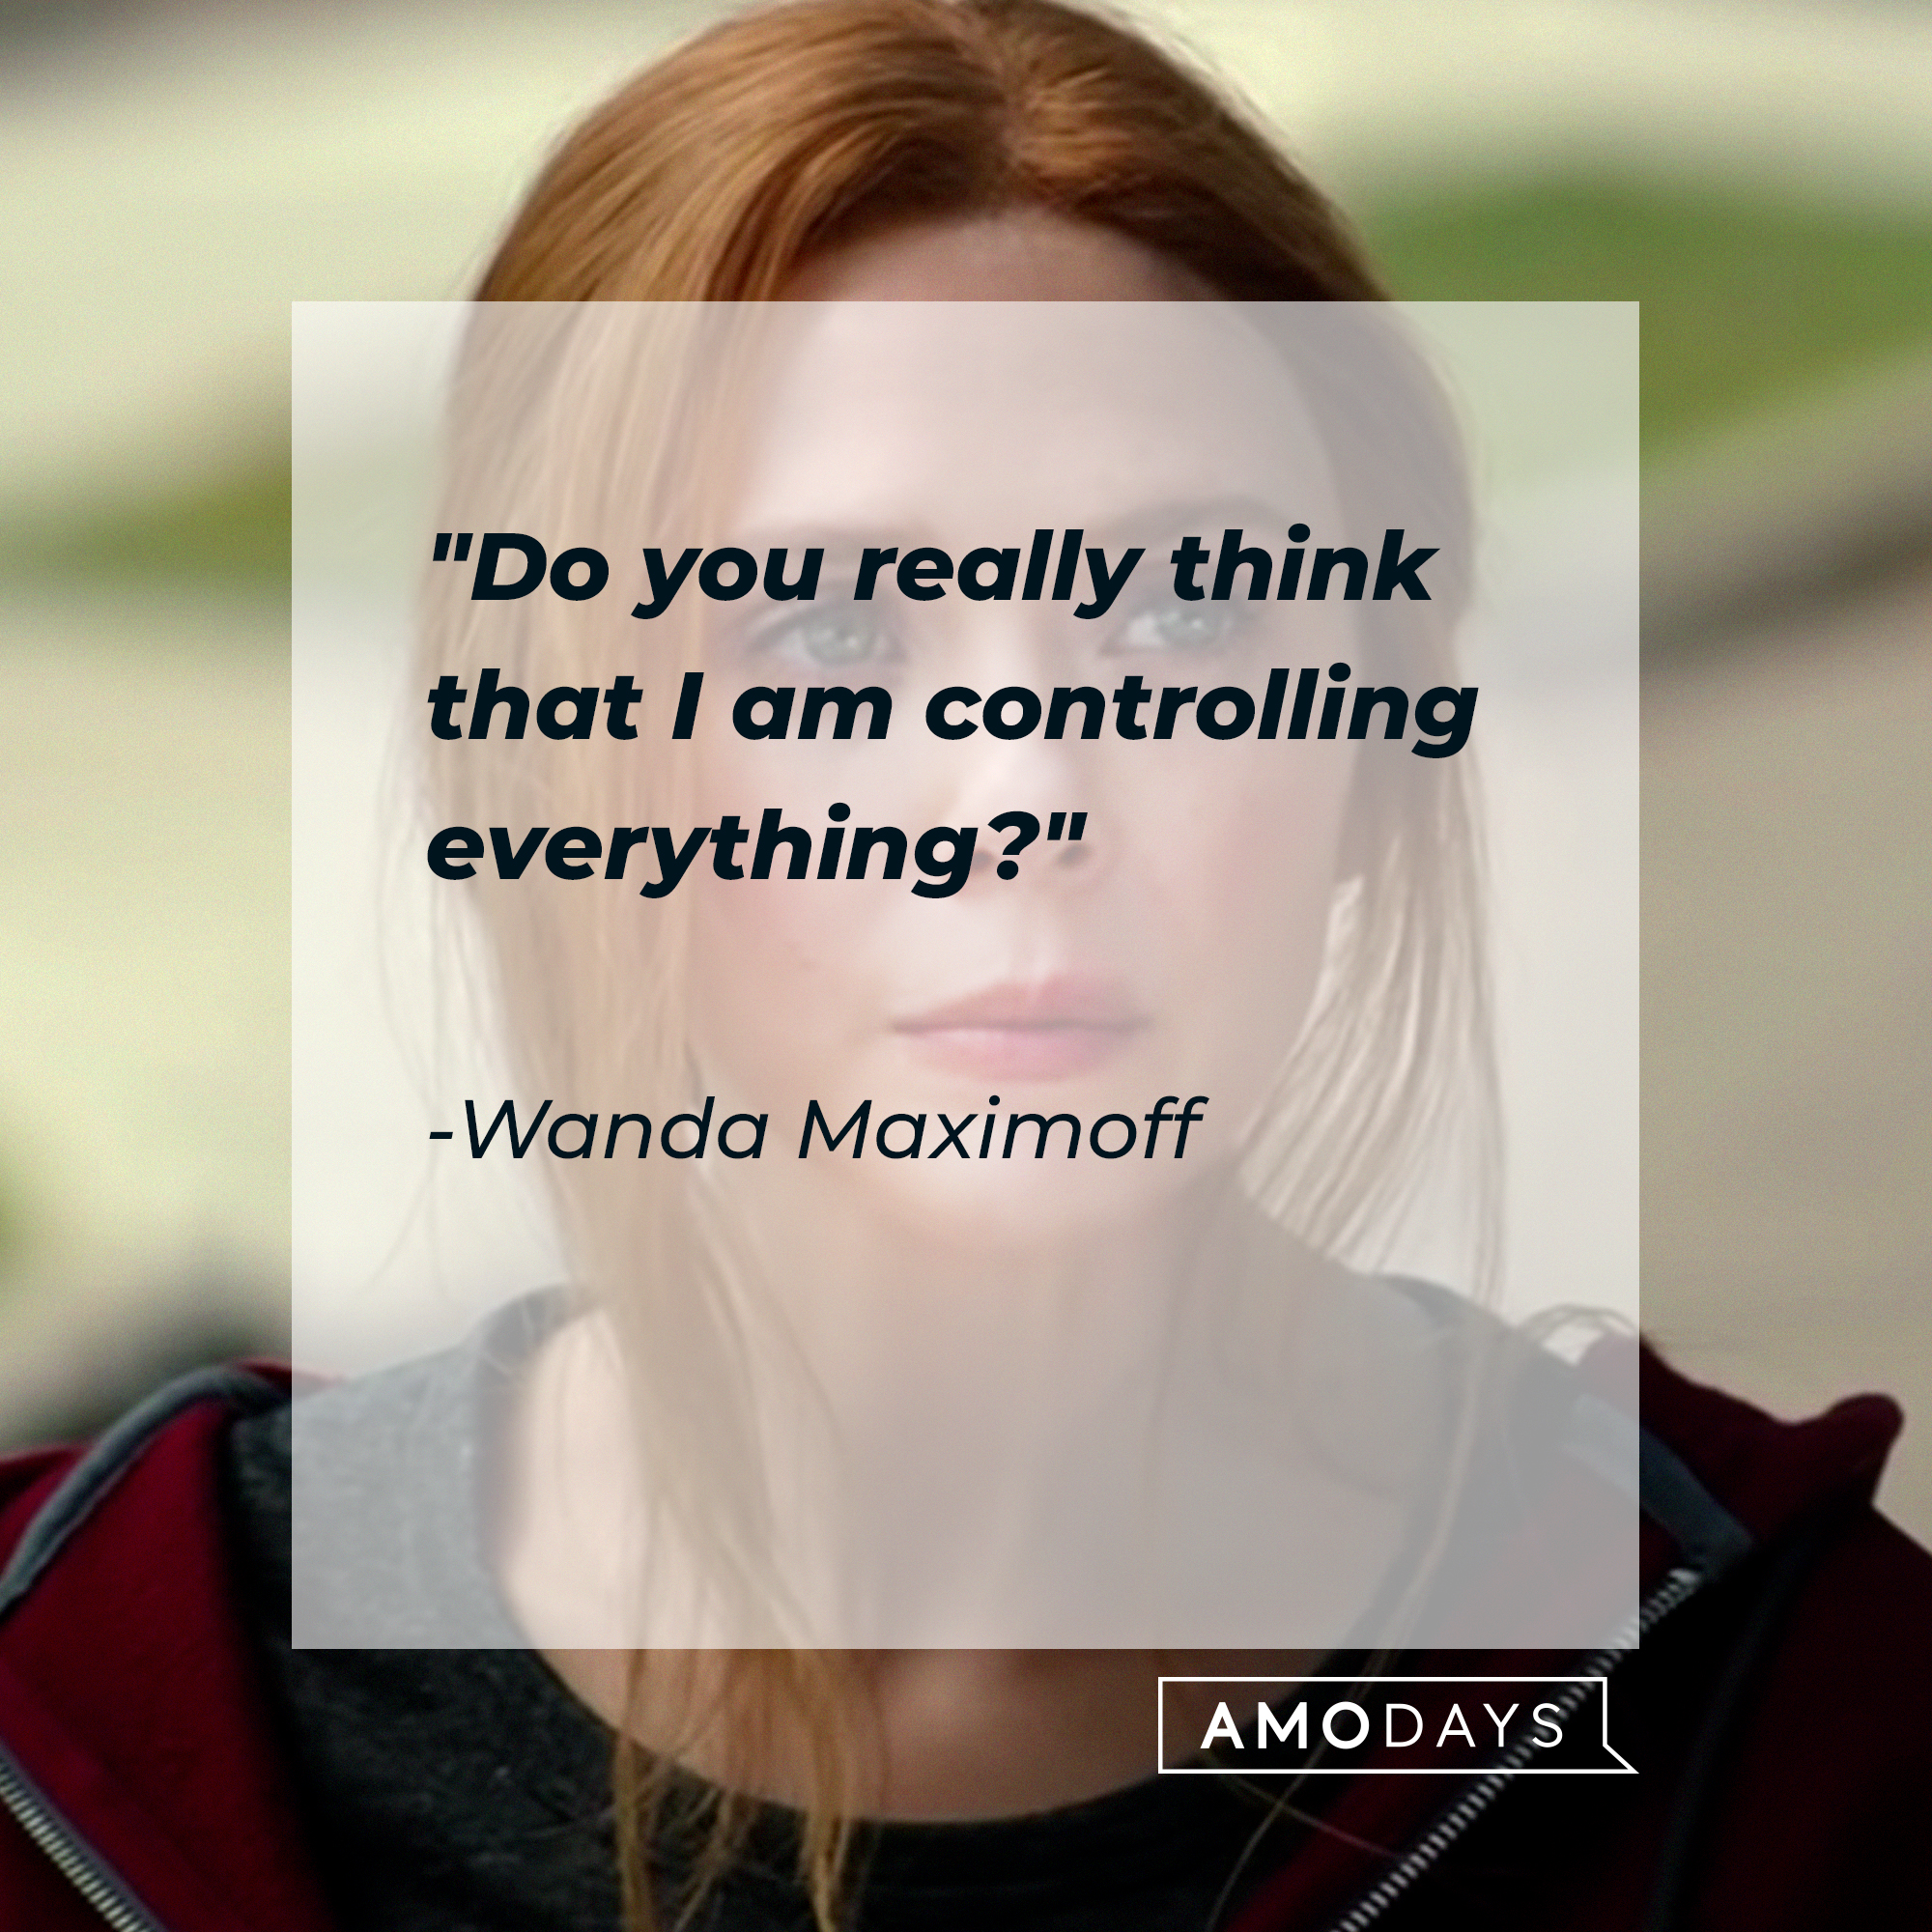 Wanda Maximoff's quote: "Do you really think that I am controlling everything?" | Source: Facebook/wandavisionofficial